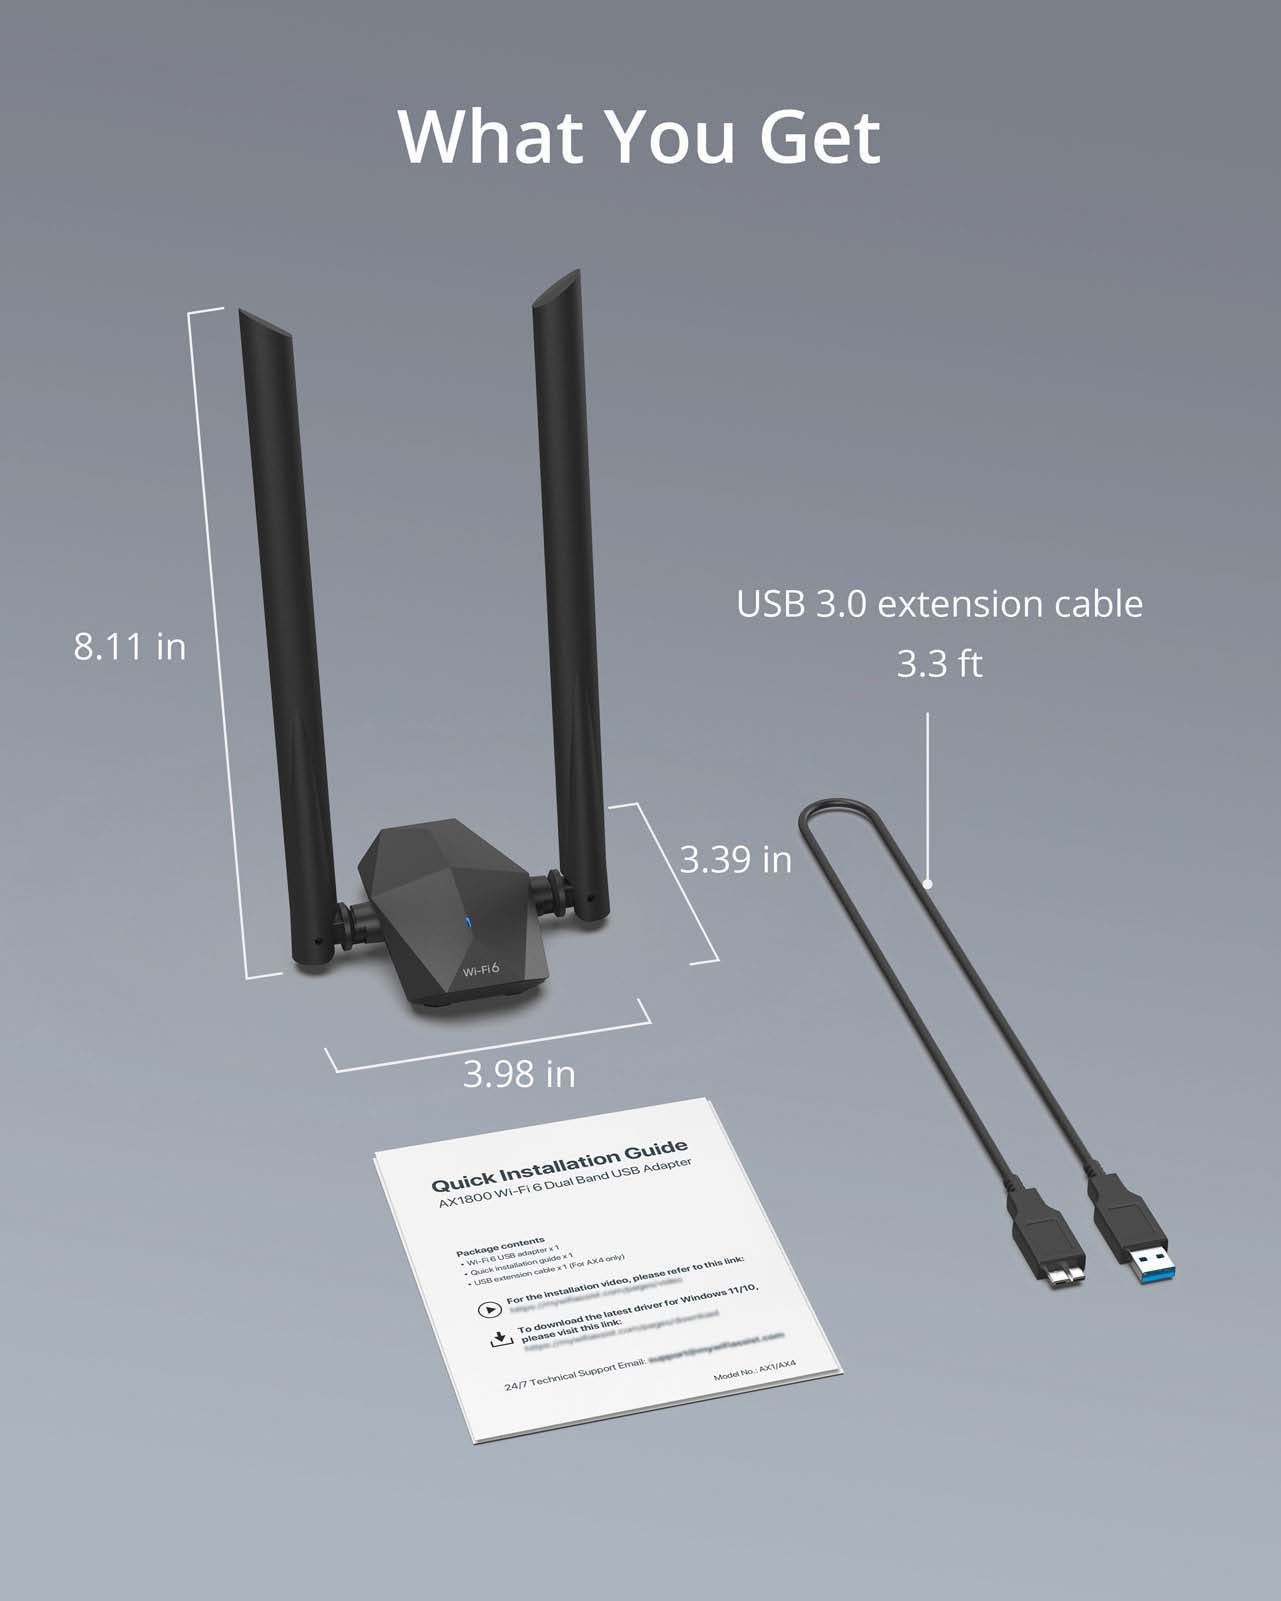 One wifi 6 usb wireless adapter, one 3.3 ft extension cable and one user manual are included in the package